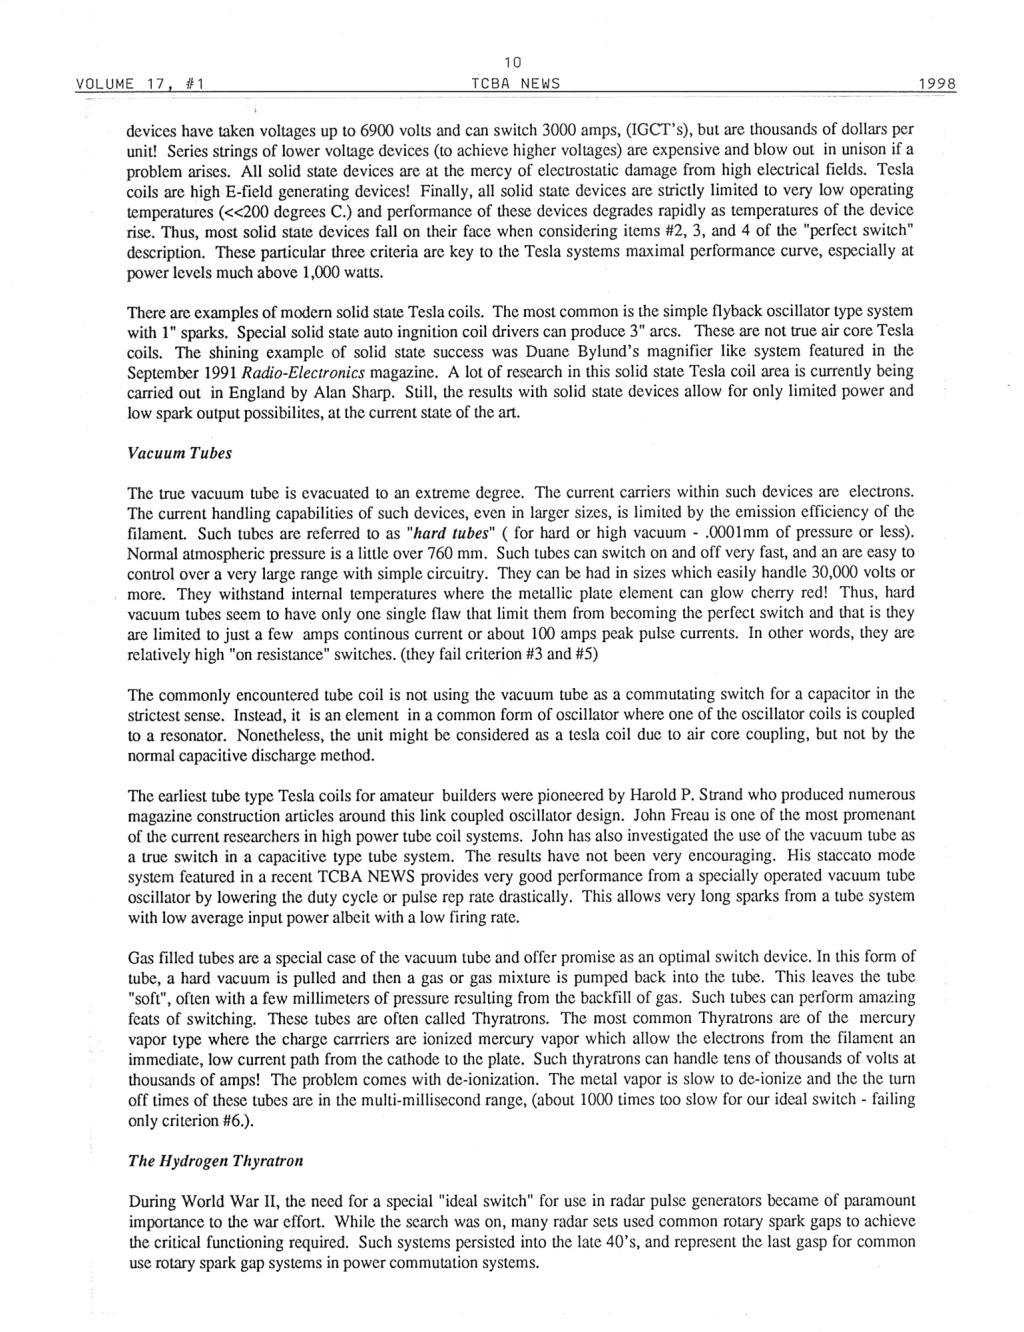 TCBA Volume 17 - Issue 1 - Page 10 of 18